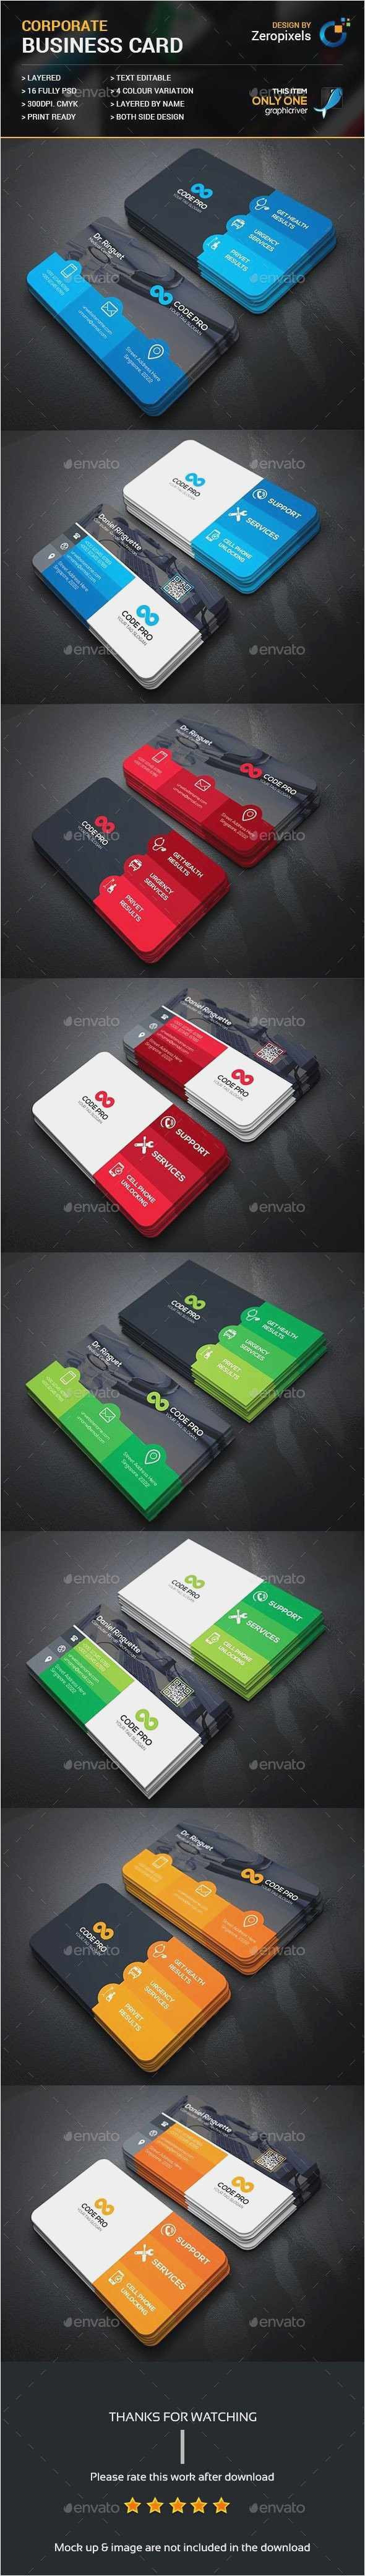 Free Download 50 Template Business Cards Download Of Overnight Prints Business Card Template